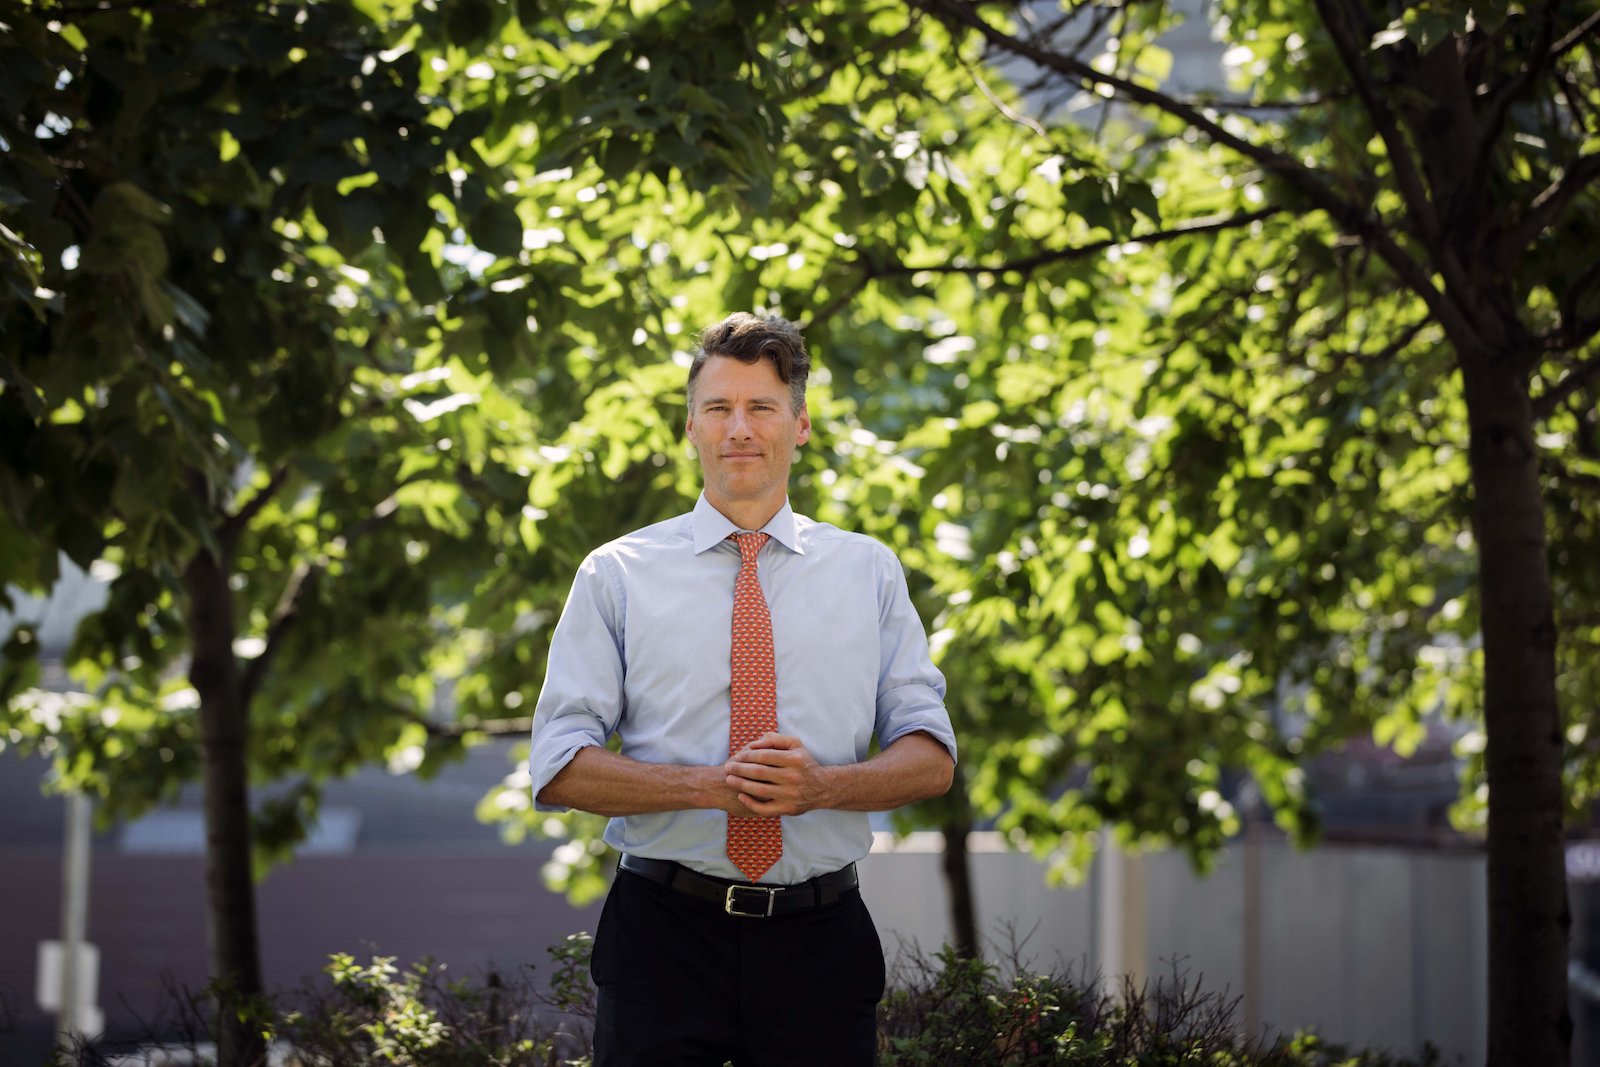 a man in a button-up shirt and a coral tie stands in a tree-filled area